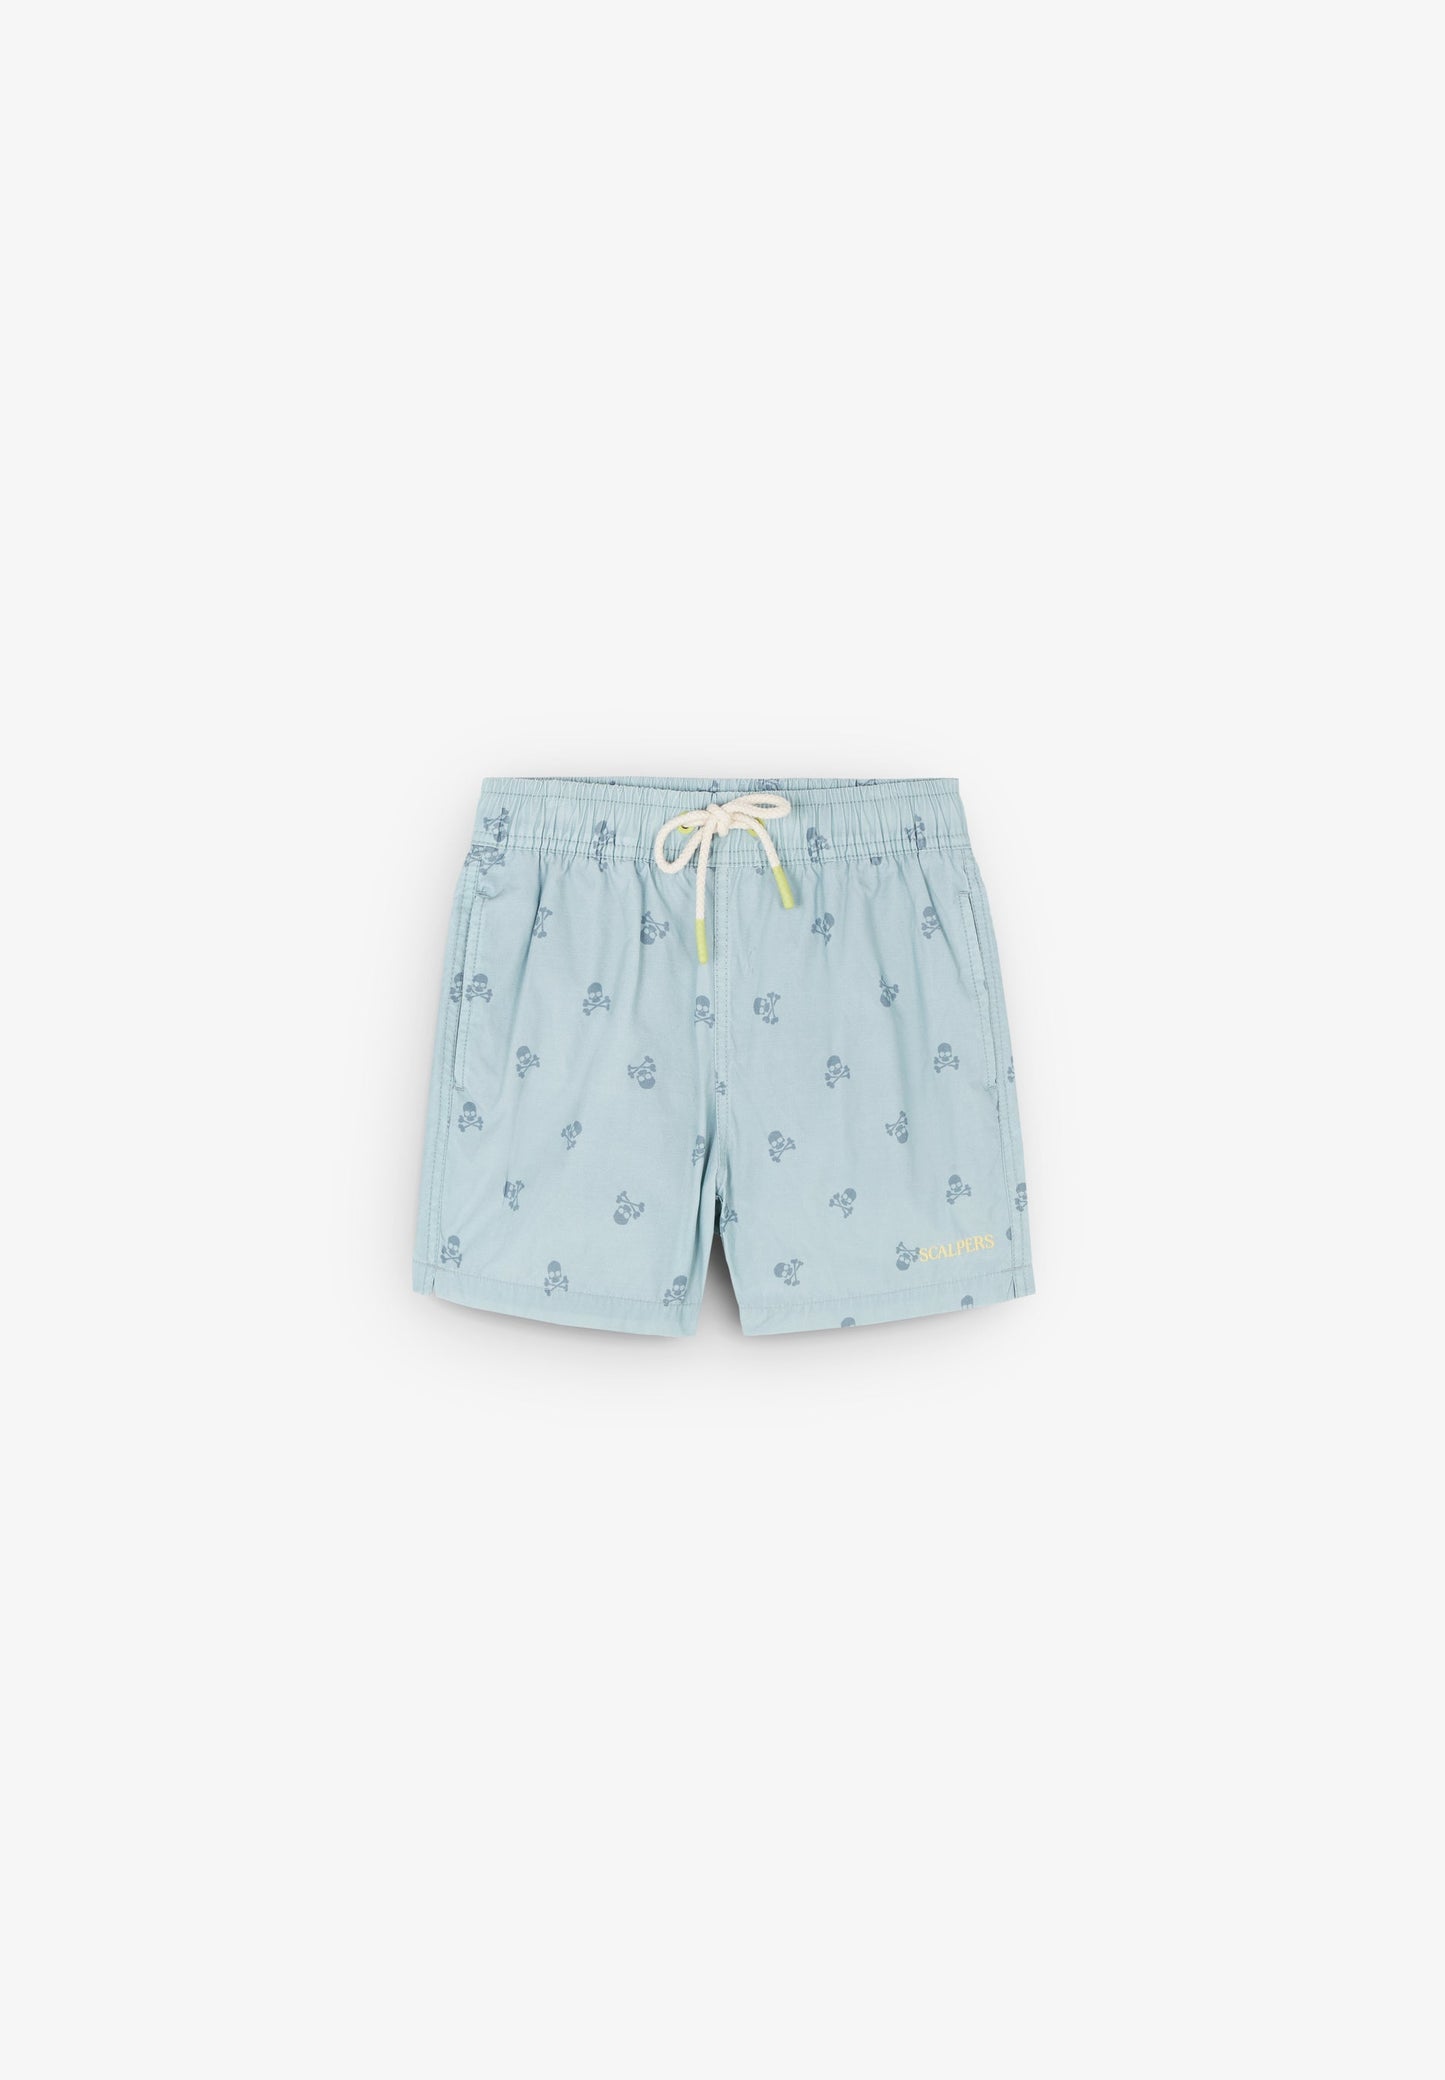 CLASSIC SWIMMING TRUNKS WITH SKULLS